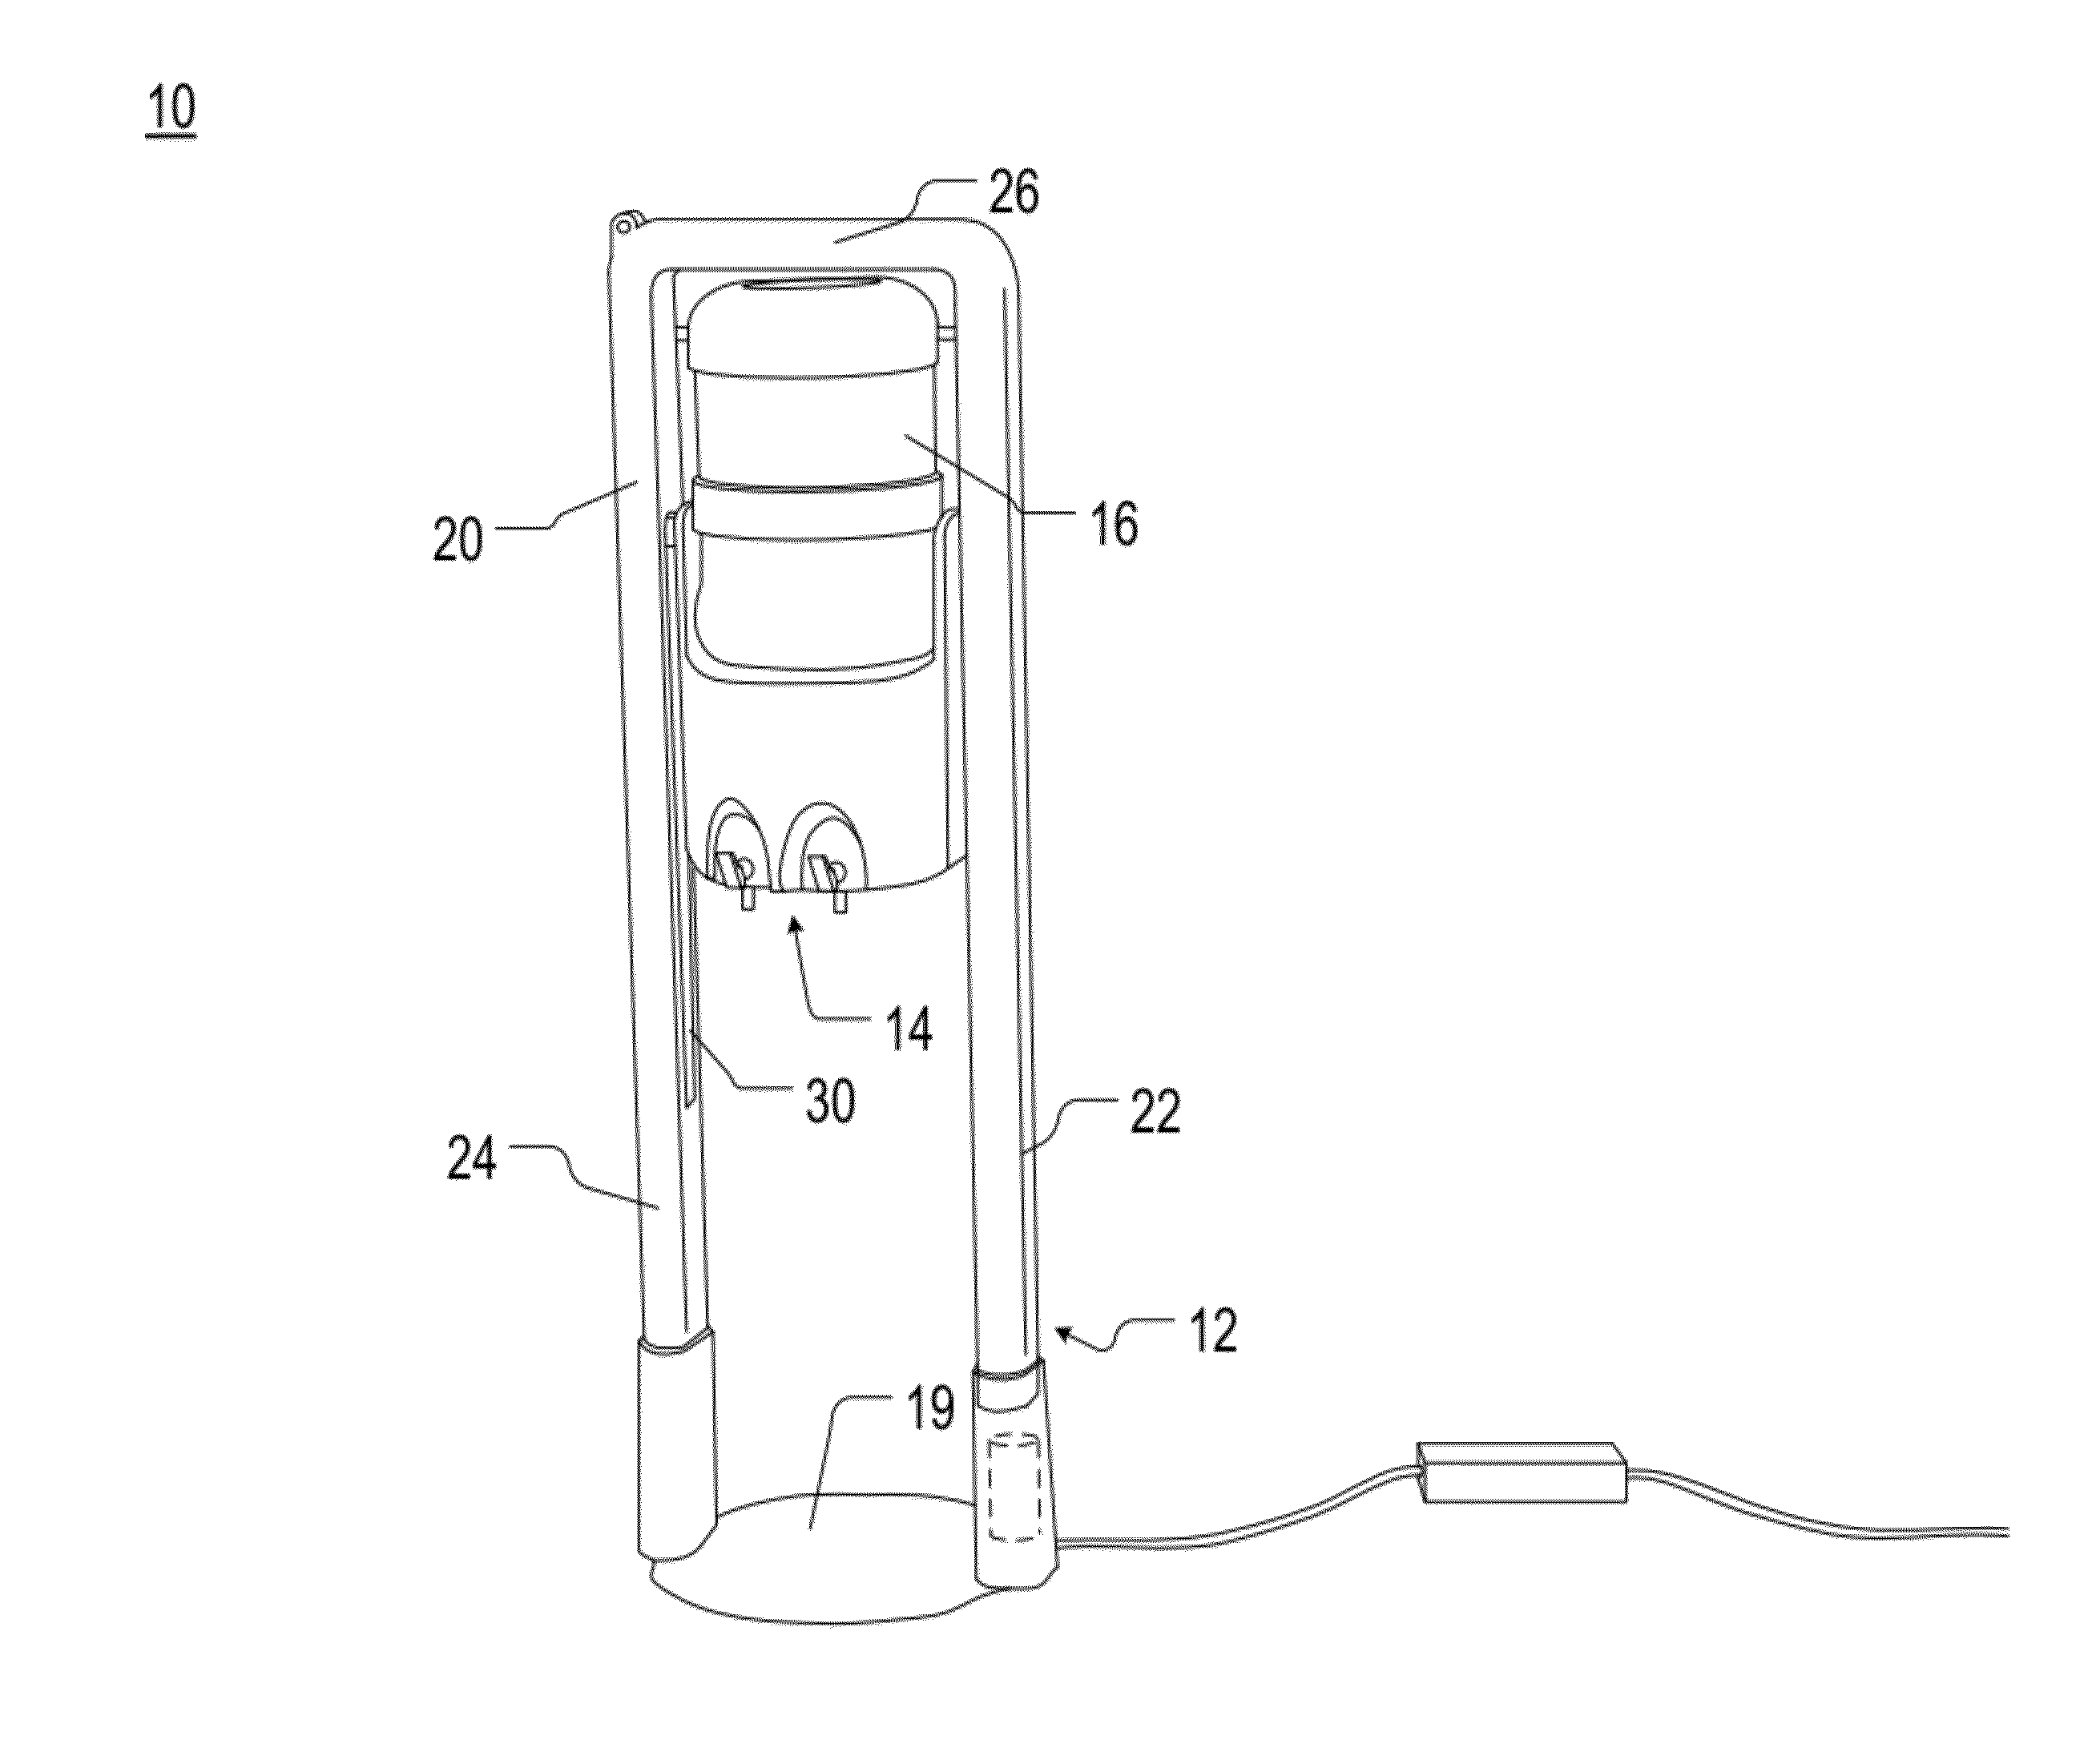 Lifting and rotating water reservoir with attached water bottle for dispensing of water from water cooler